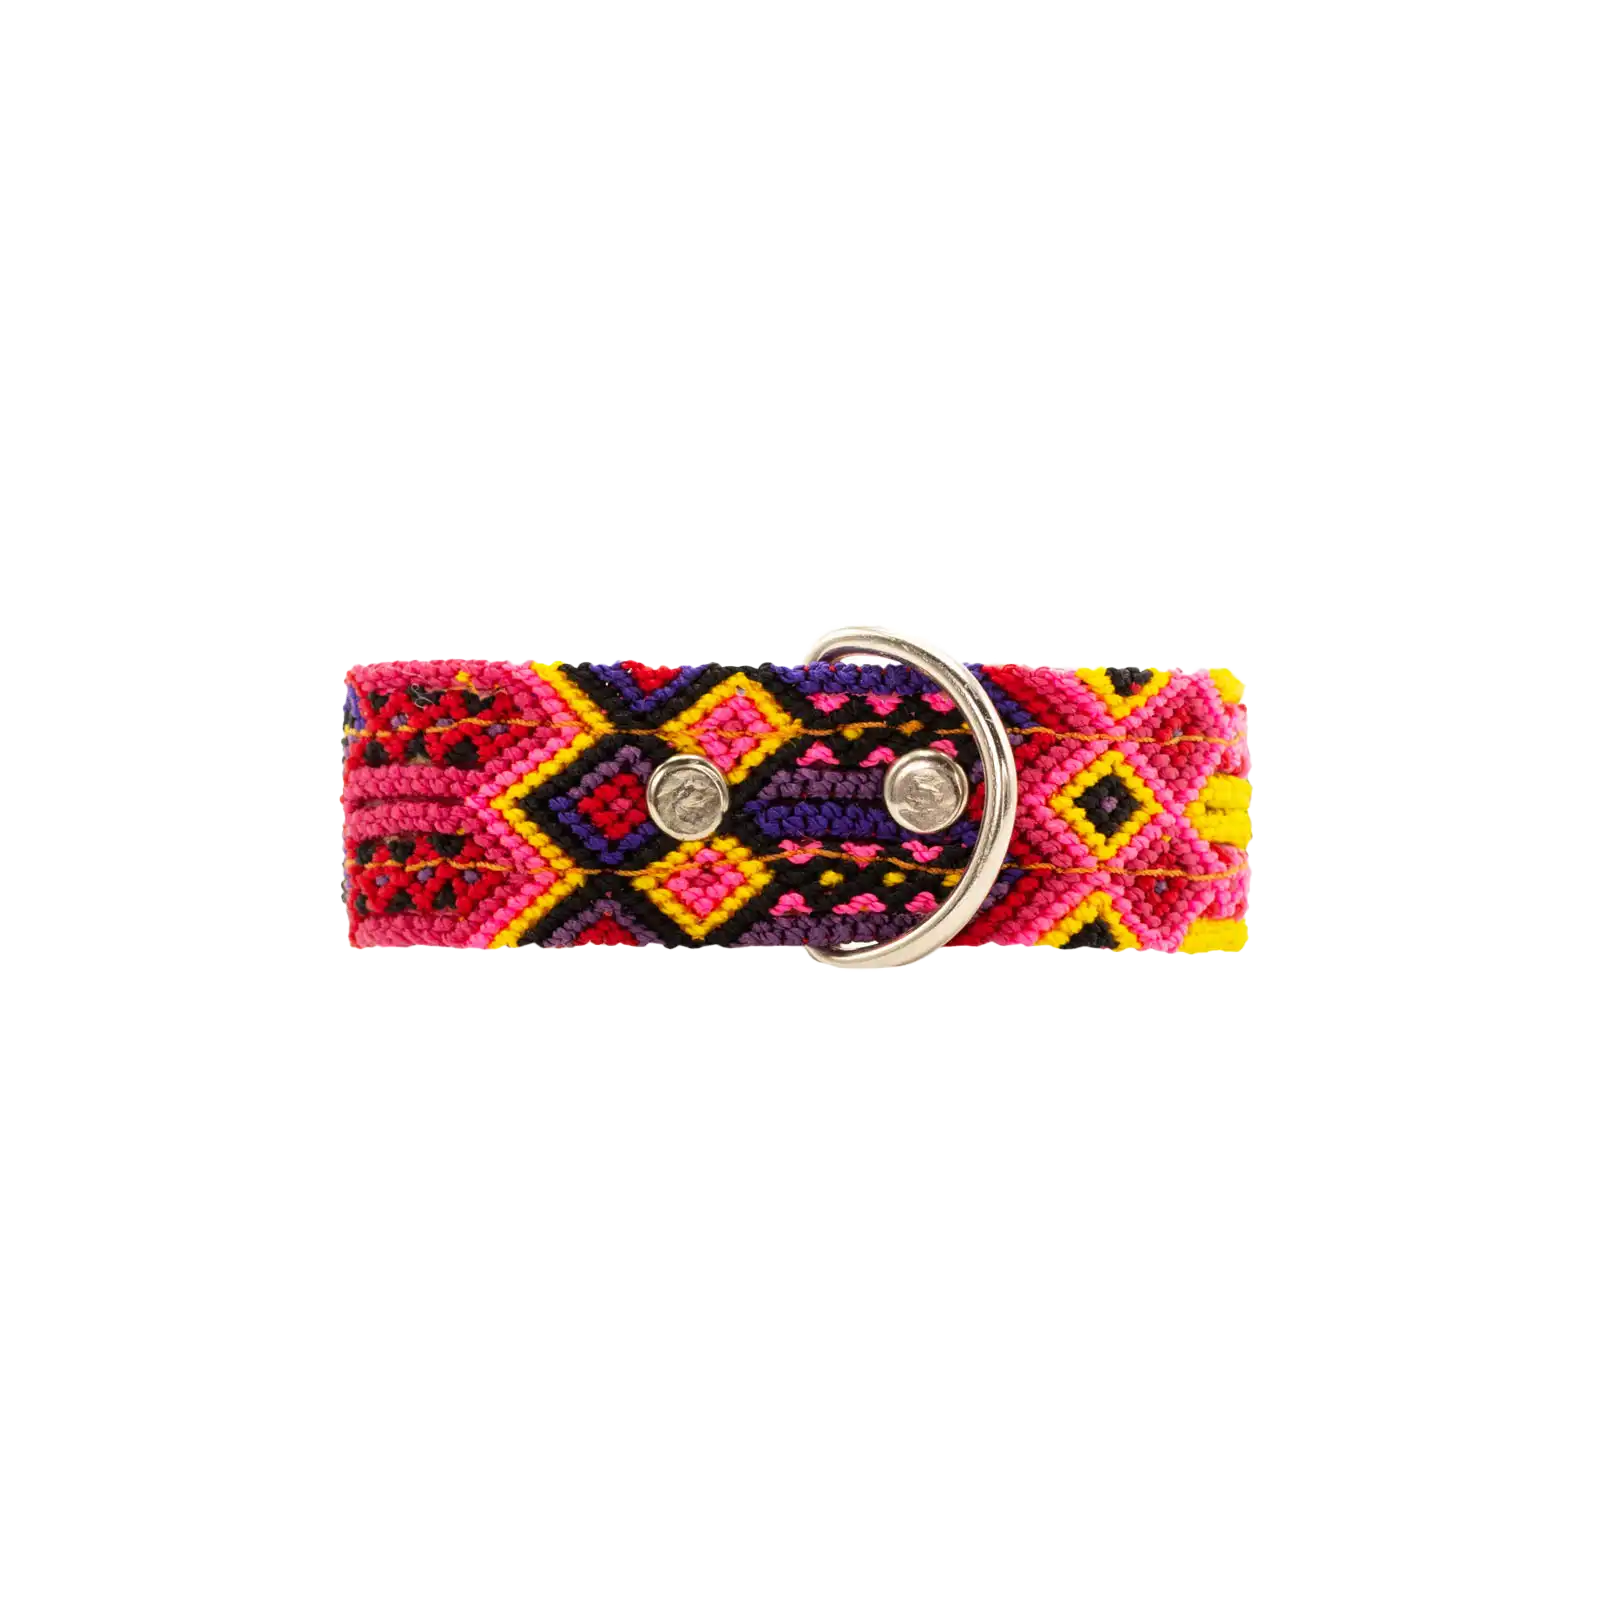 Handcrafted dog collar with intricate weaving